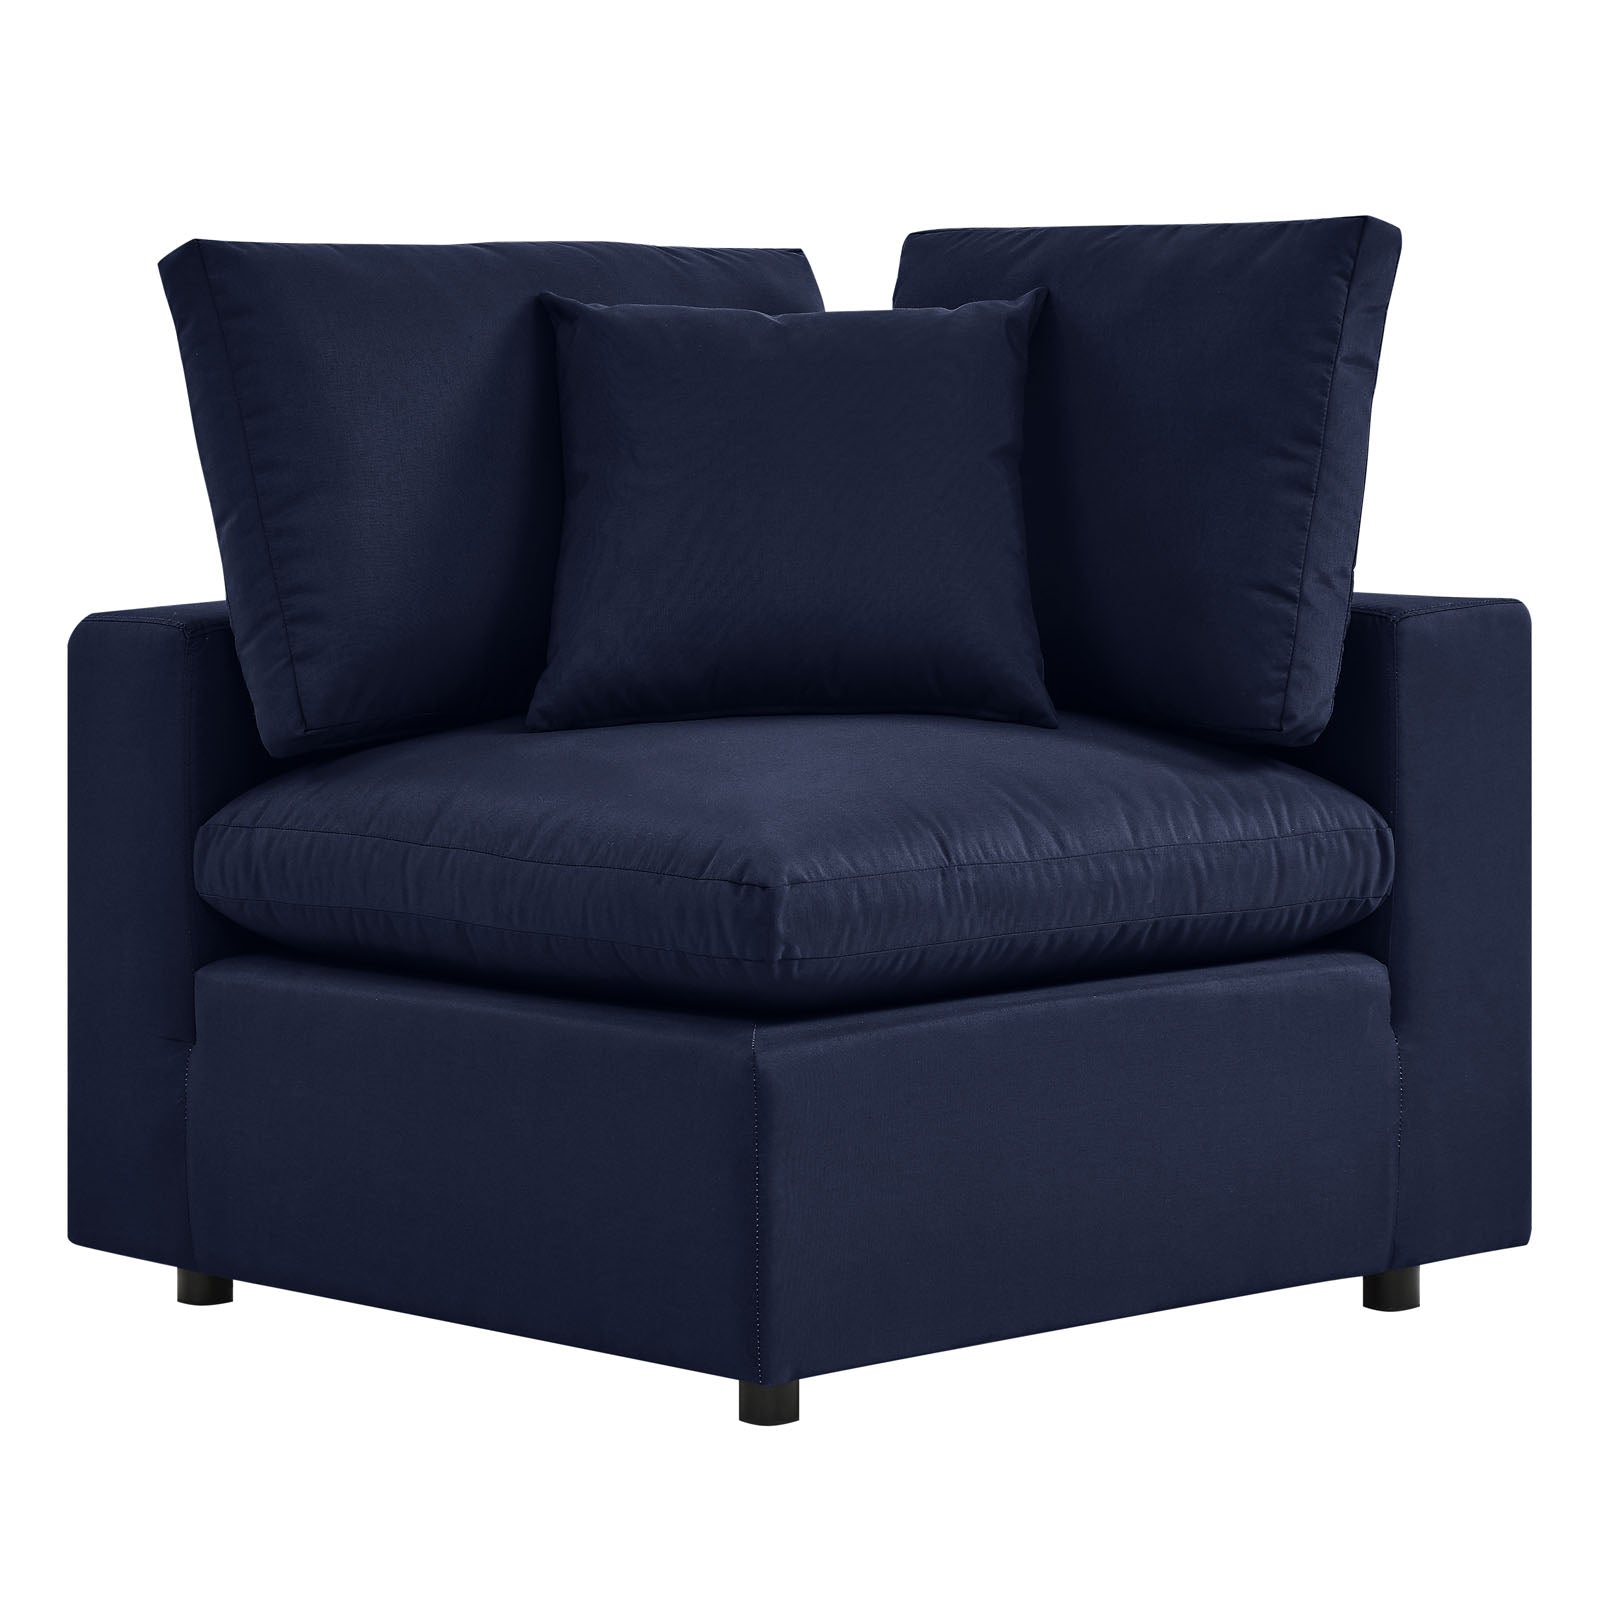 Modway Outdoor Sofas - Commix 7-Piece Outdoor Patio Sectional Sofa Navy